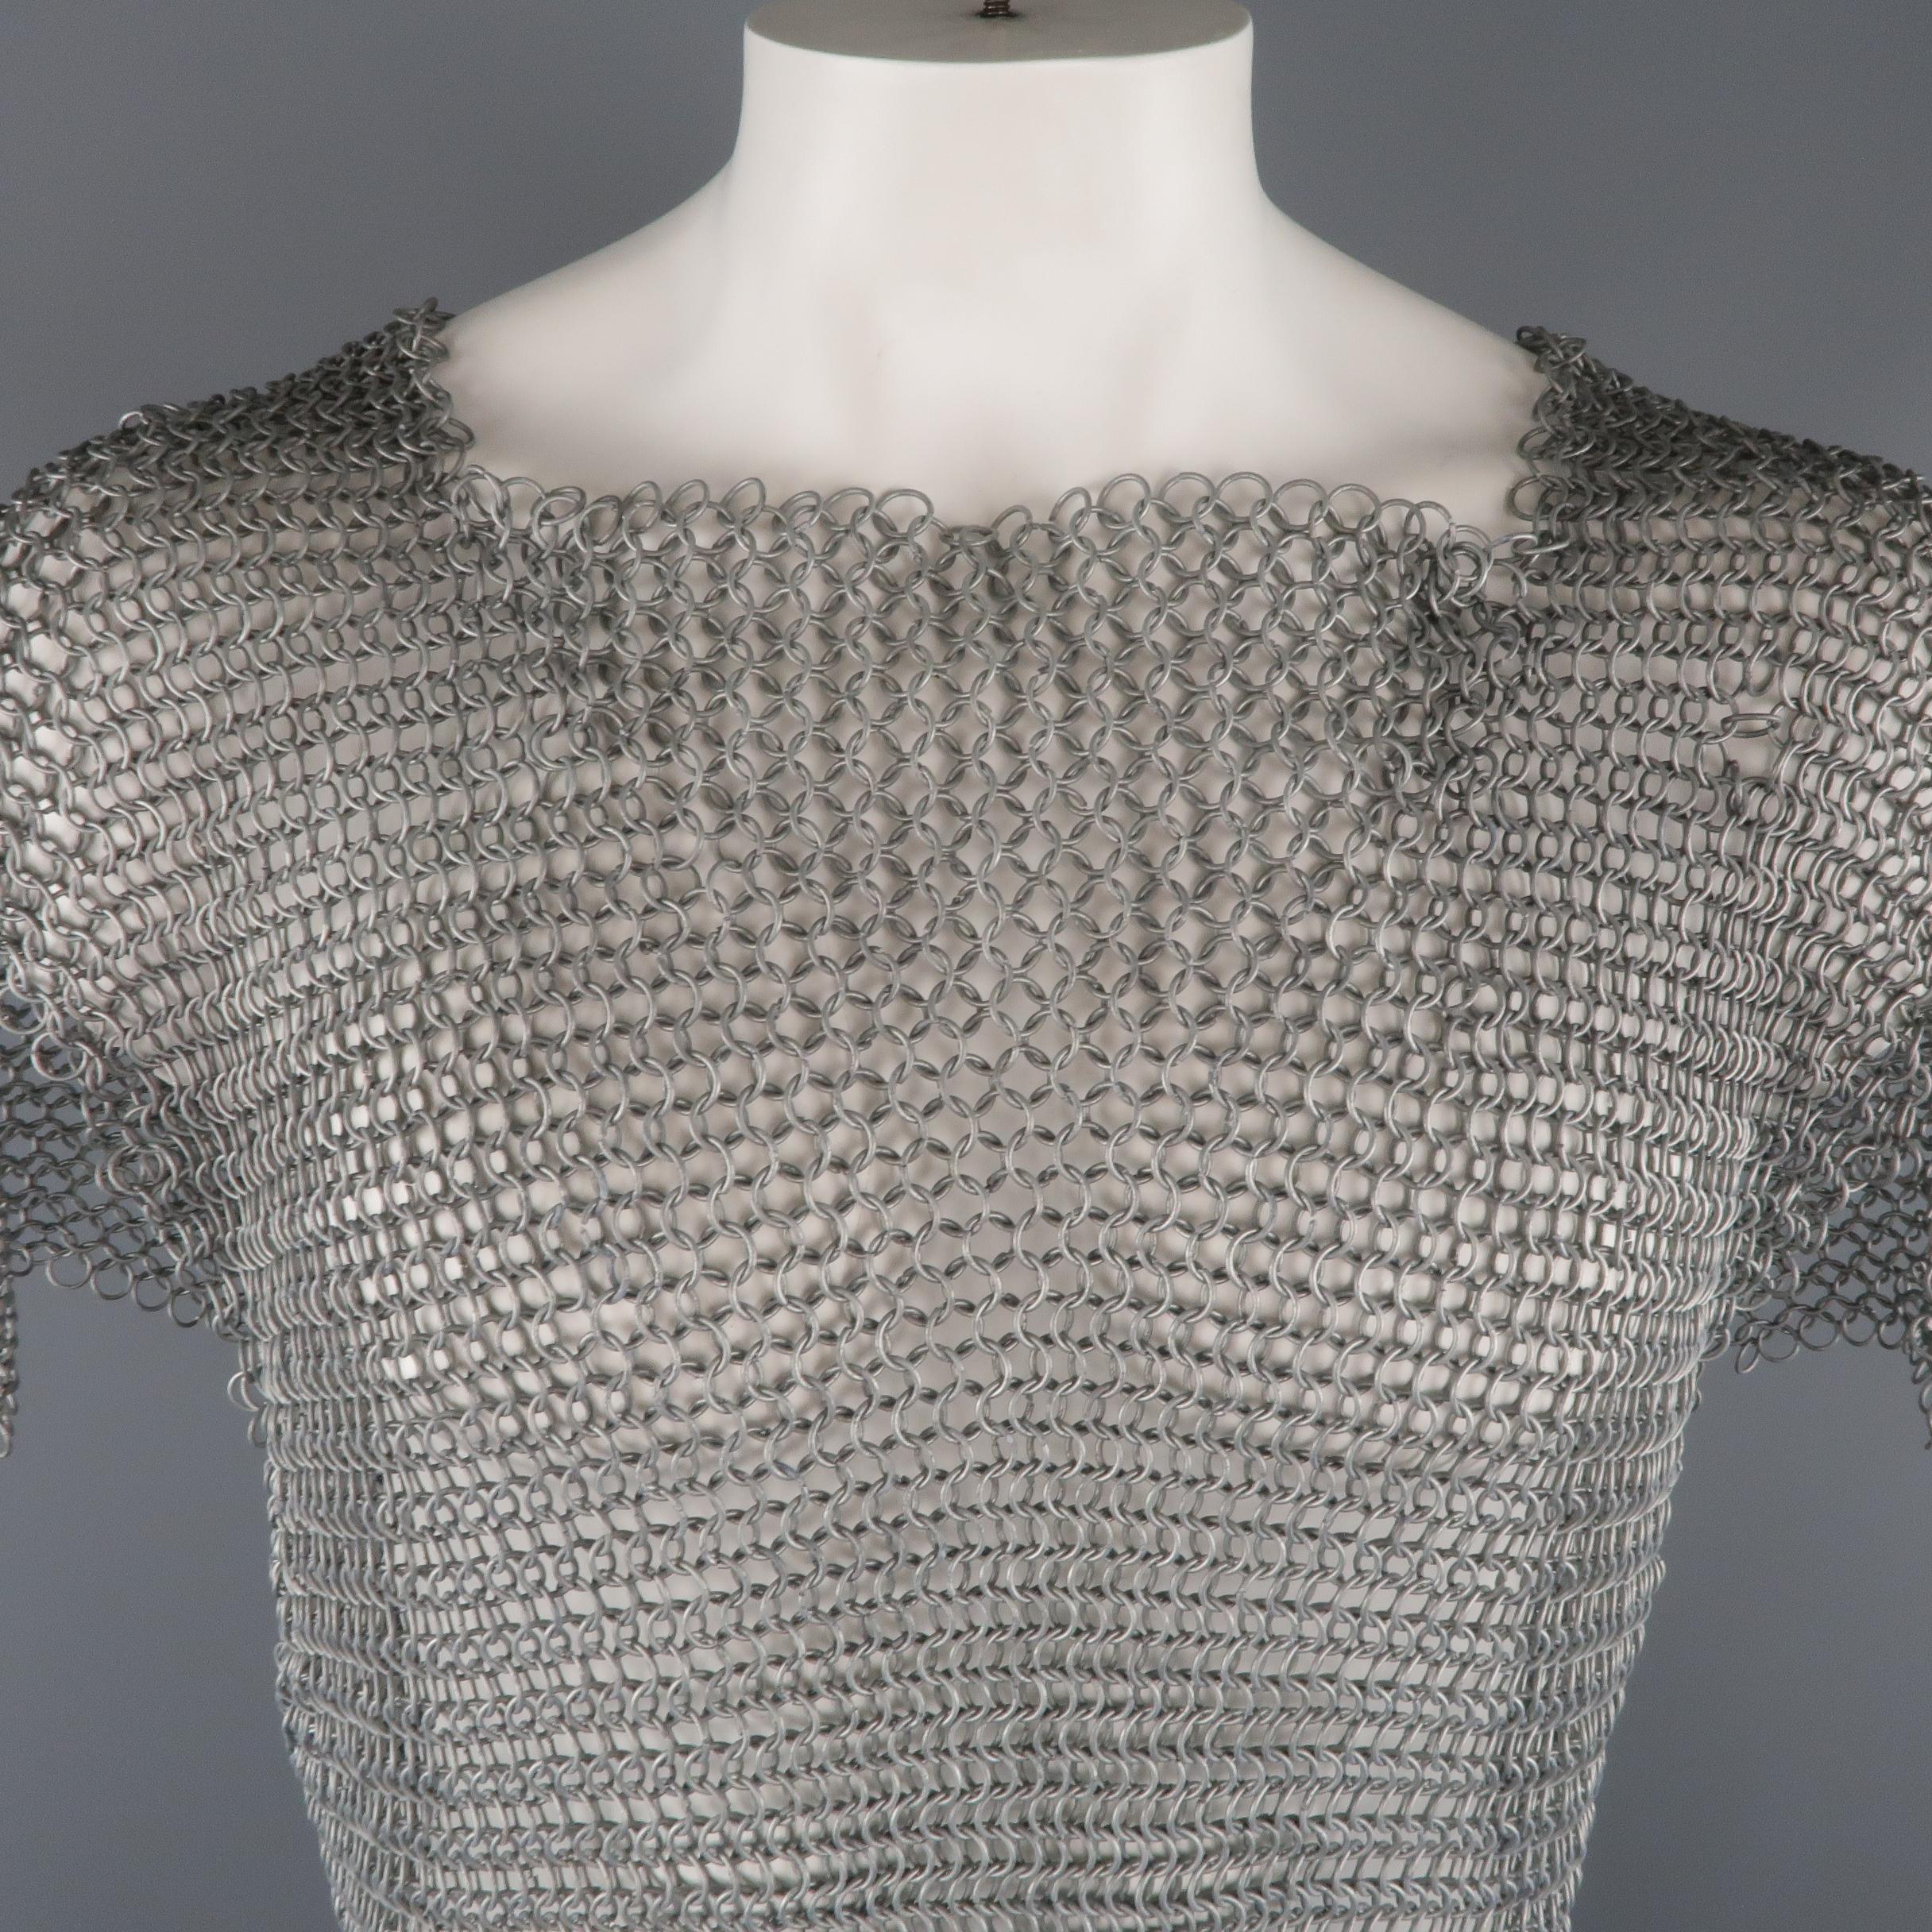 This vintage Medieval style armor top comes in heavy antique liver tone loop chainmail with a square collar, flap sleeves, and oversized silhouette. Very heavy material and some where throughout. As-is.
 
Good Pre-Owned Condition.
Marked: (no size)
